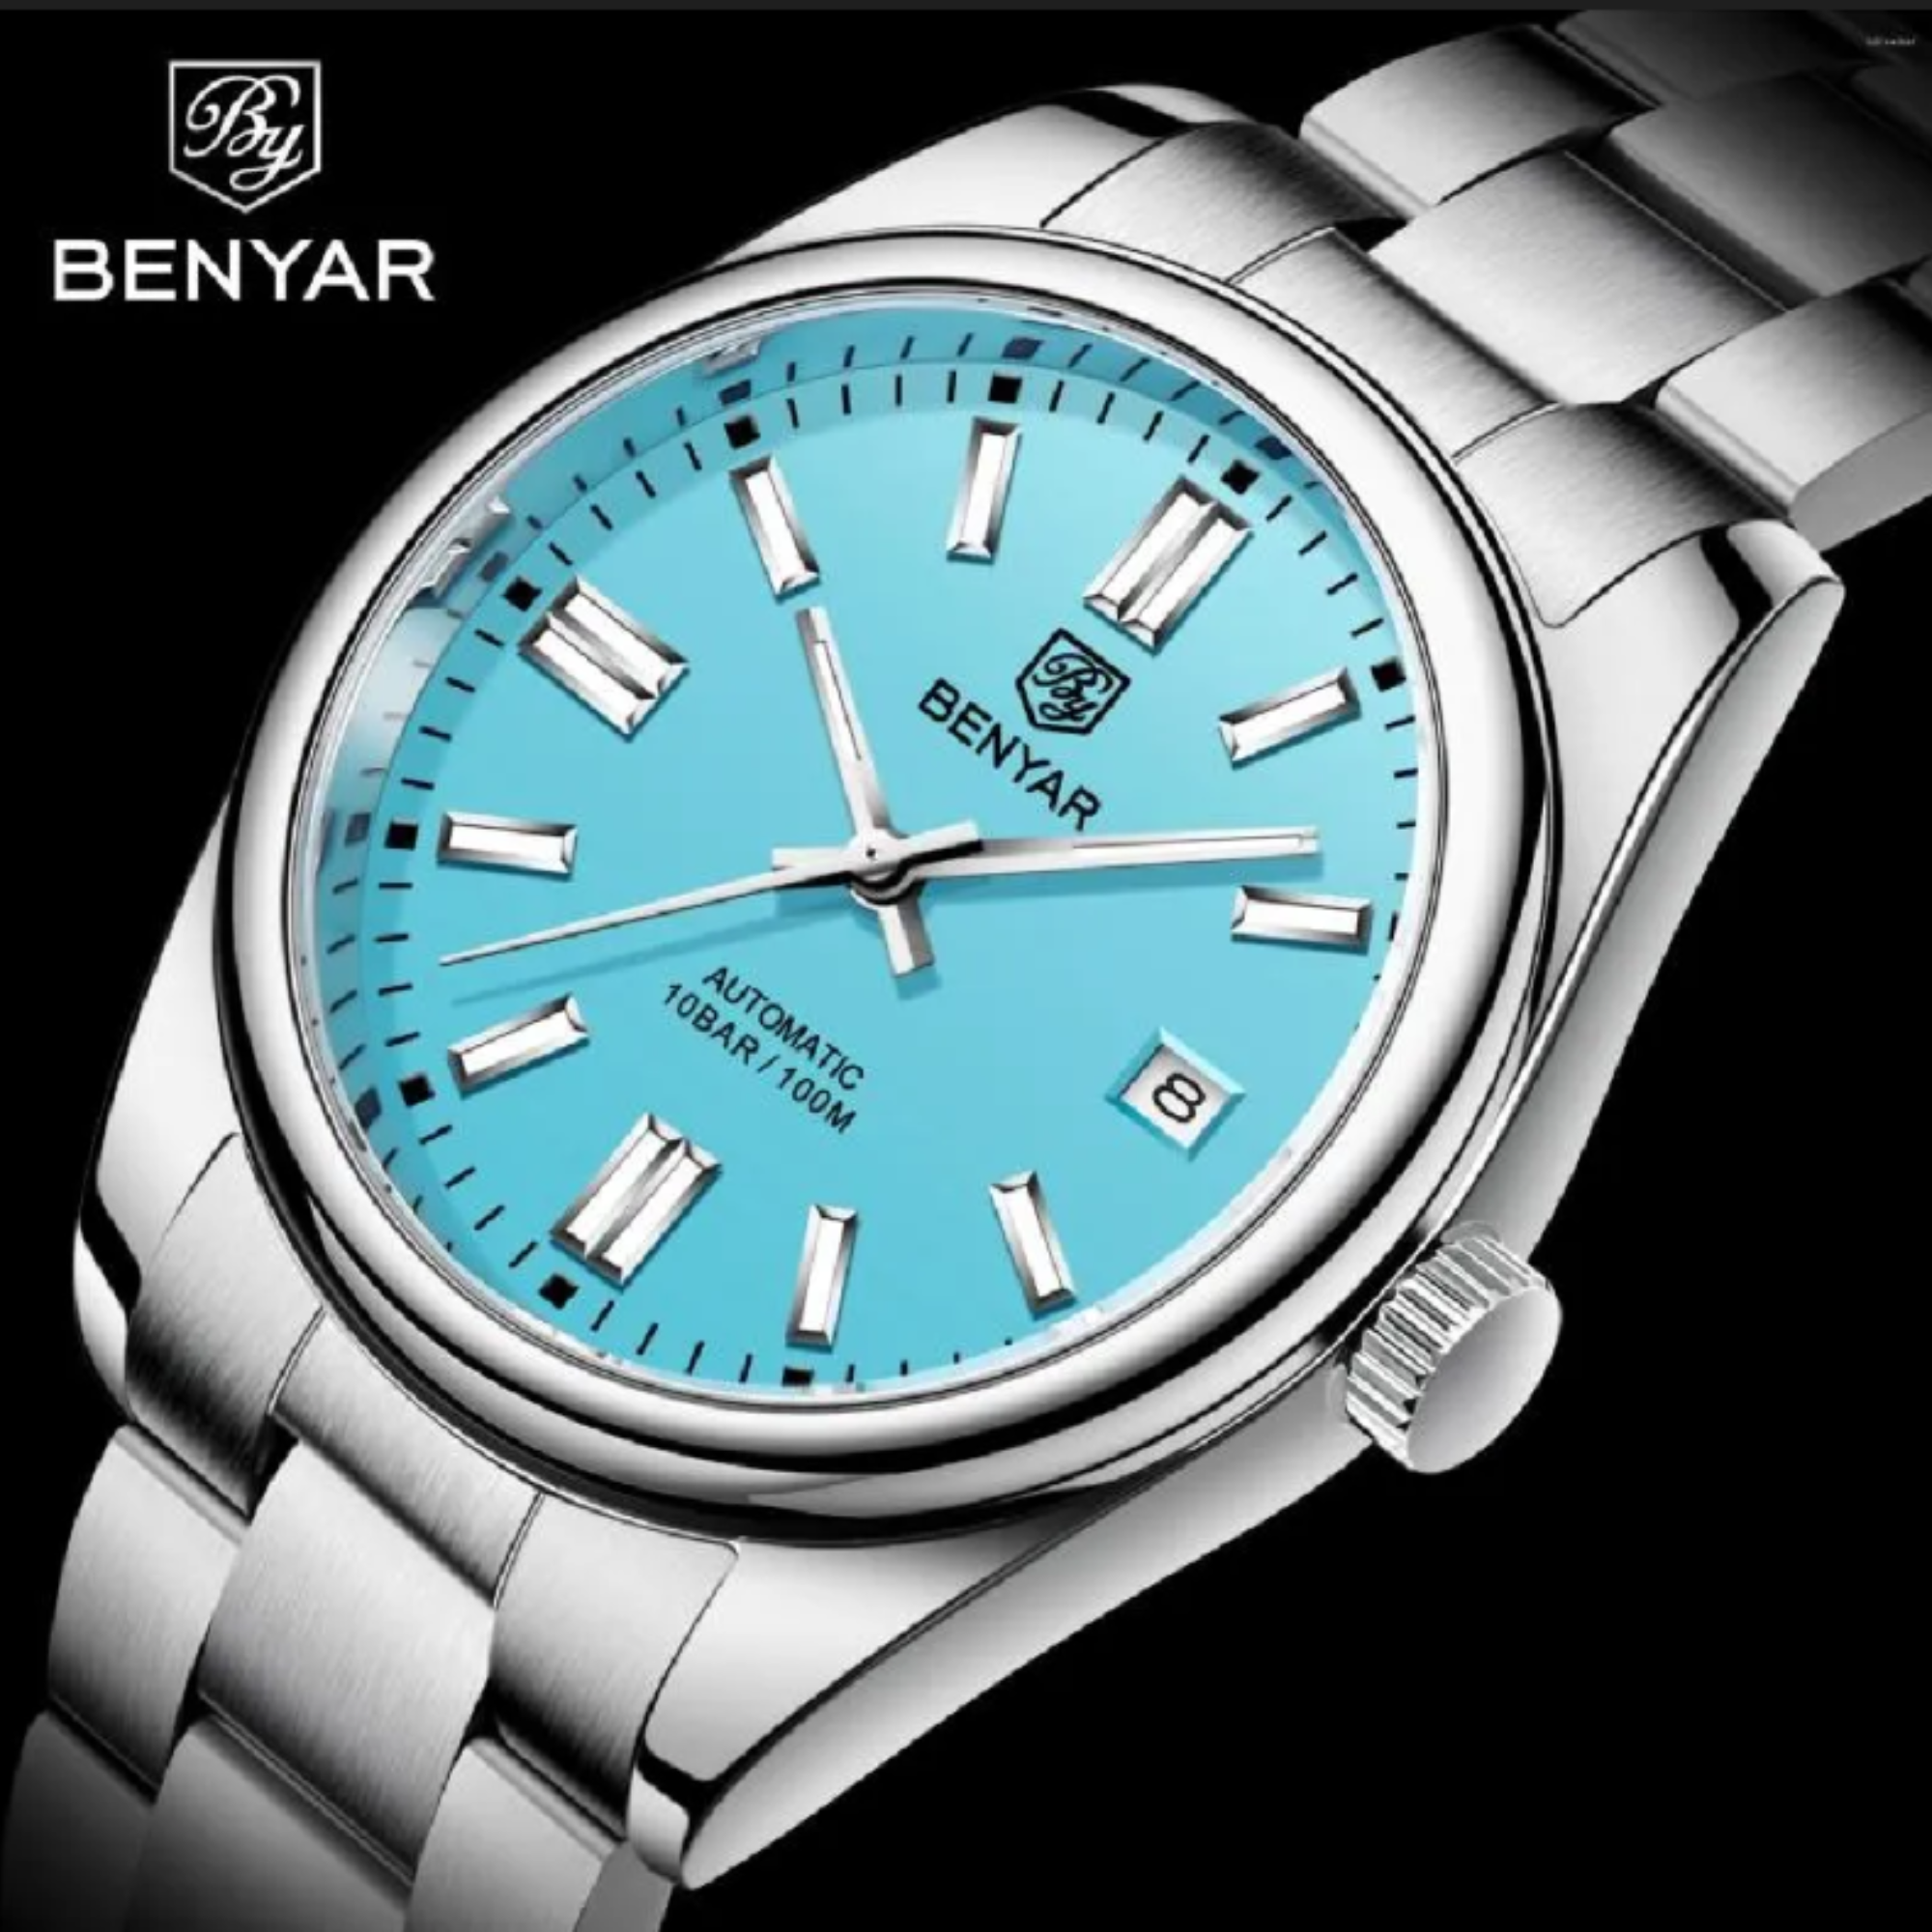 BENYAR Classic Men's Automatic Mechanical Watch Stainless Steel Strap Waterproof Luminous Simple Business Sports Wristwatch - Tiffany Blue Dial benyar watches online india dream watches